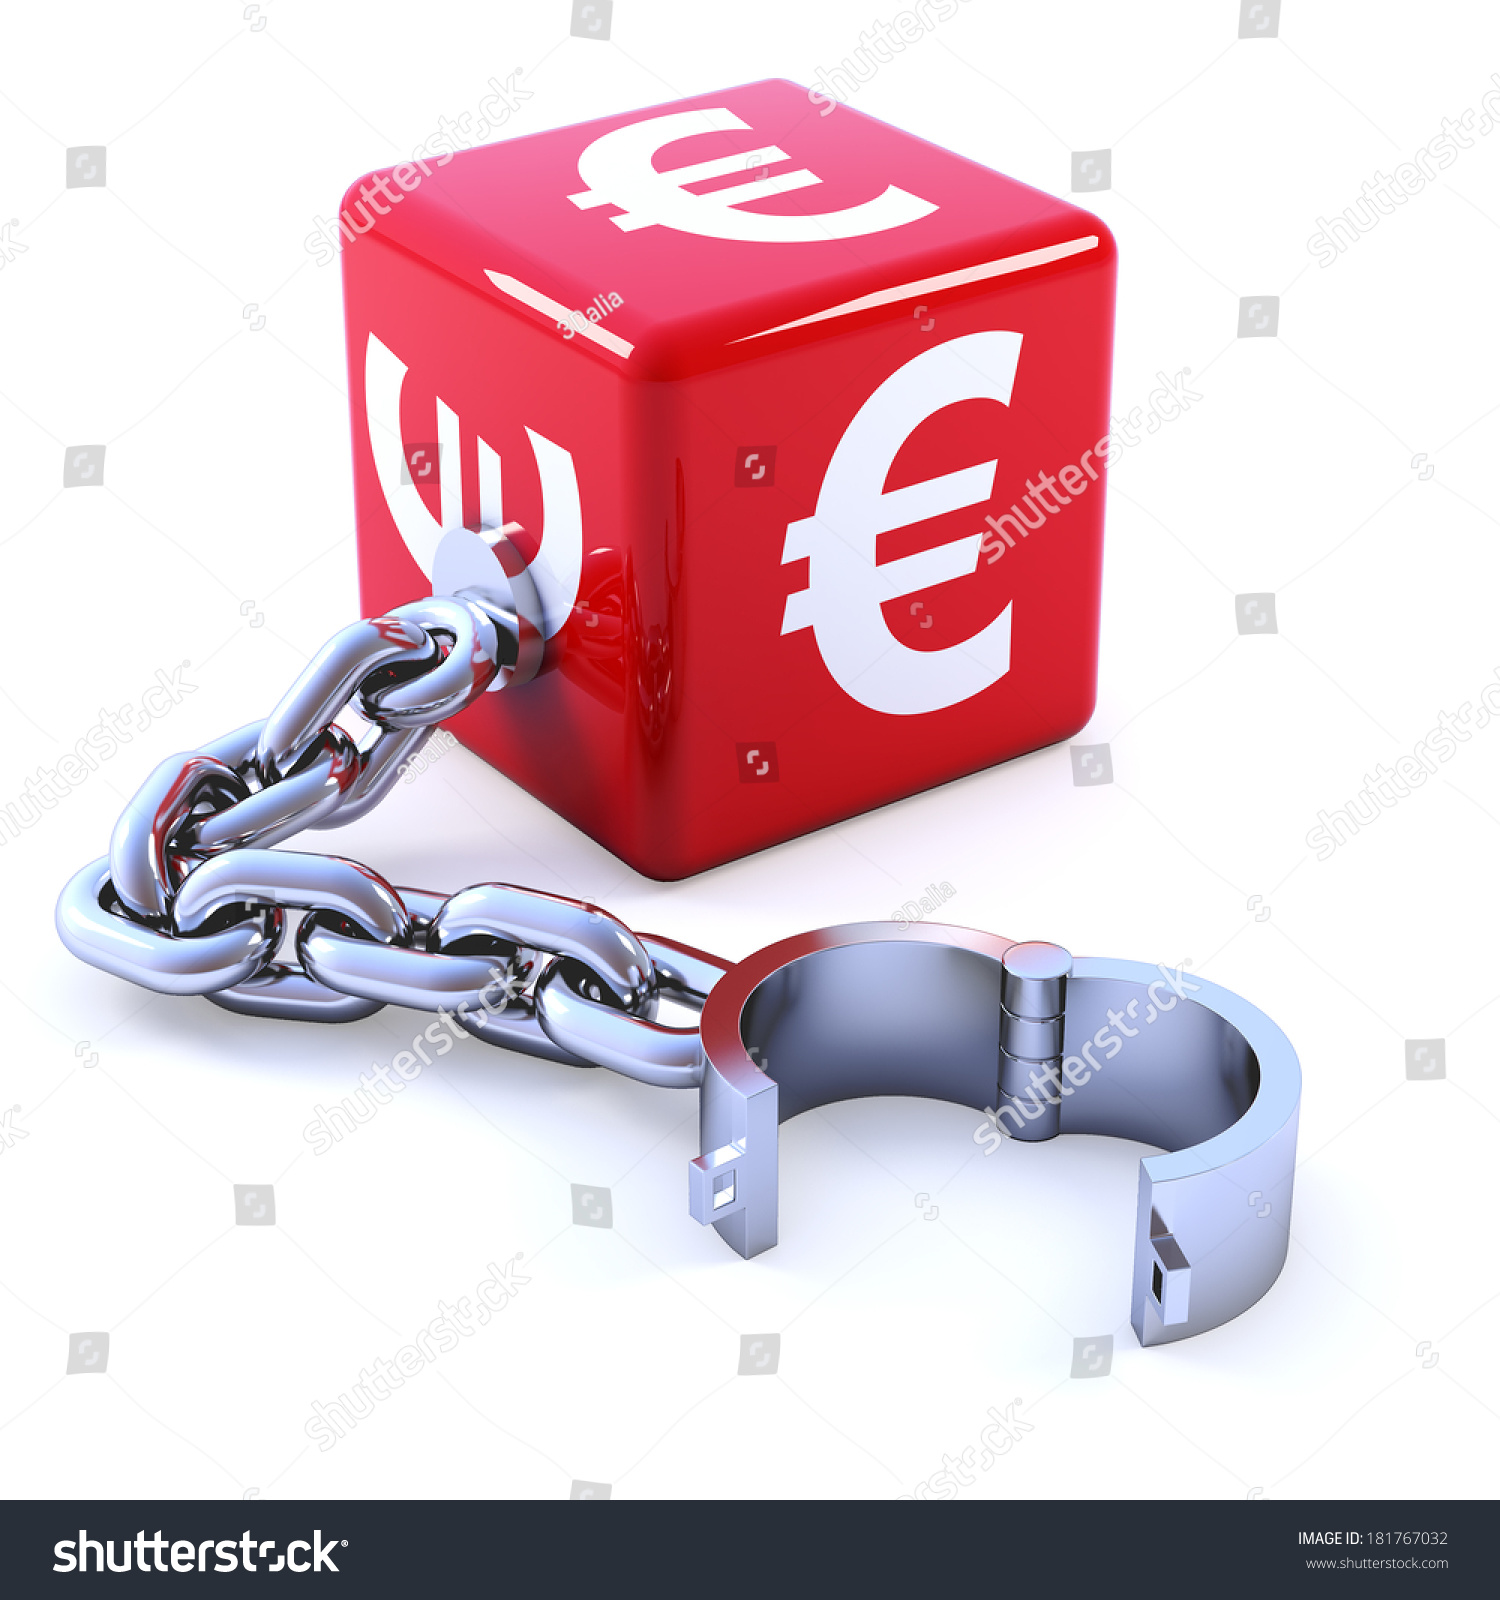 3d render of a red Euro dice with leg iron #181767032